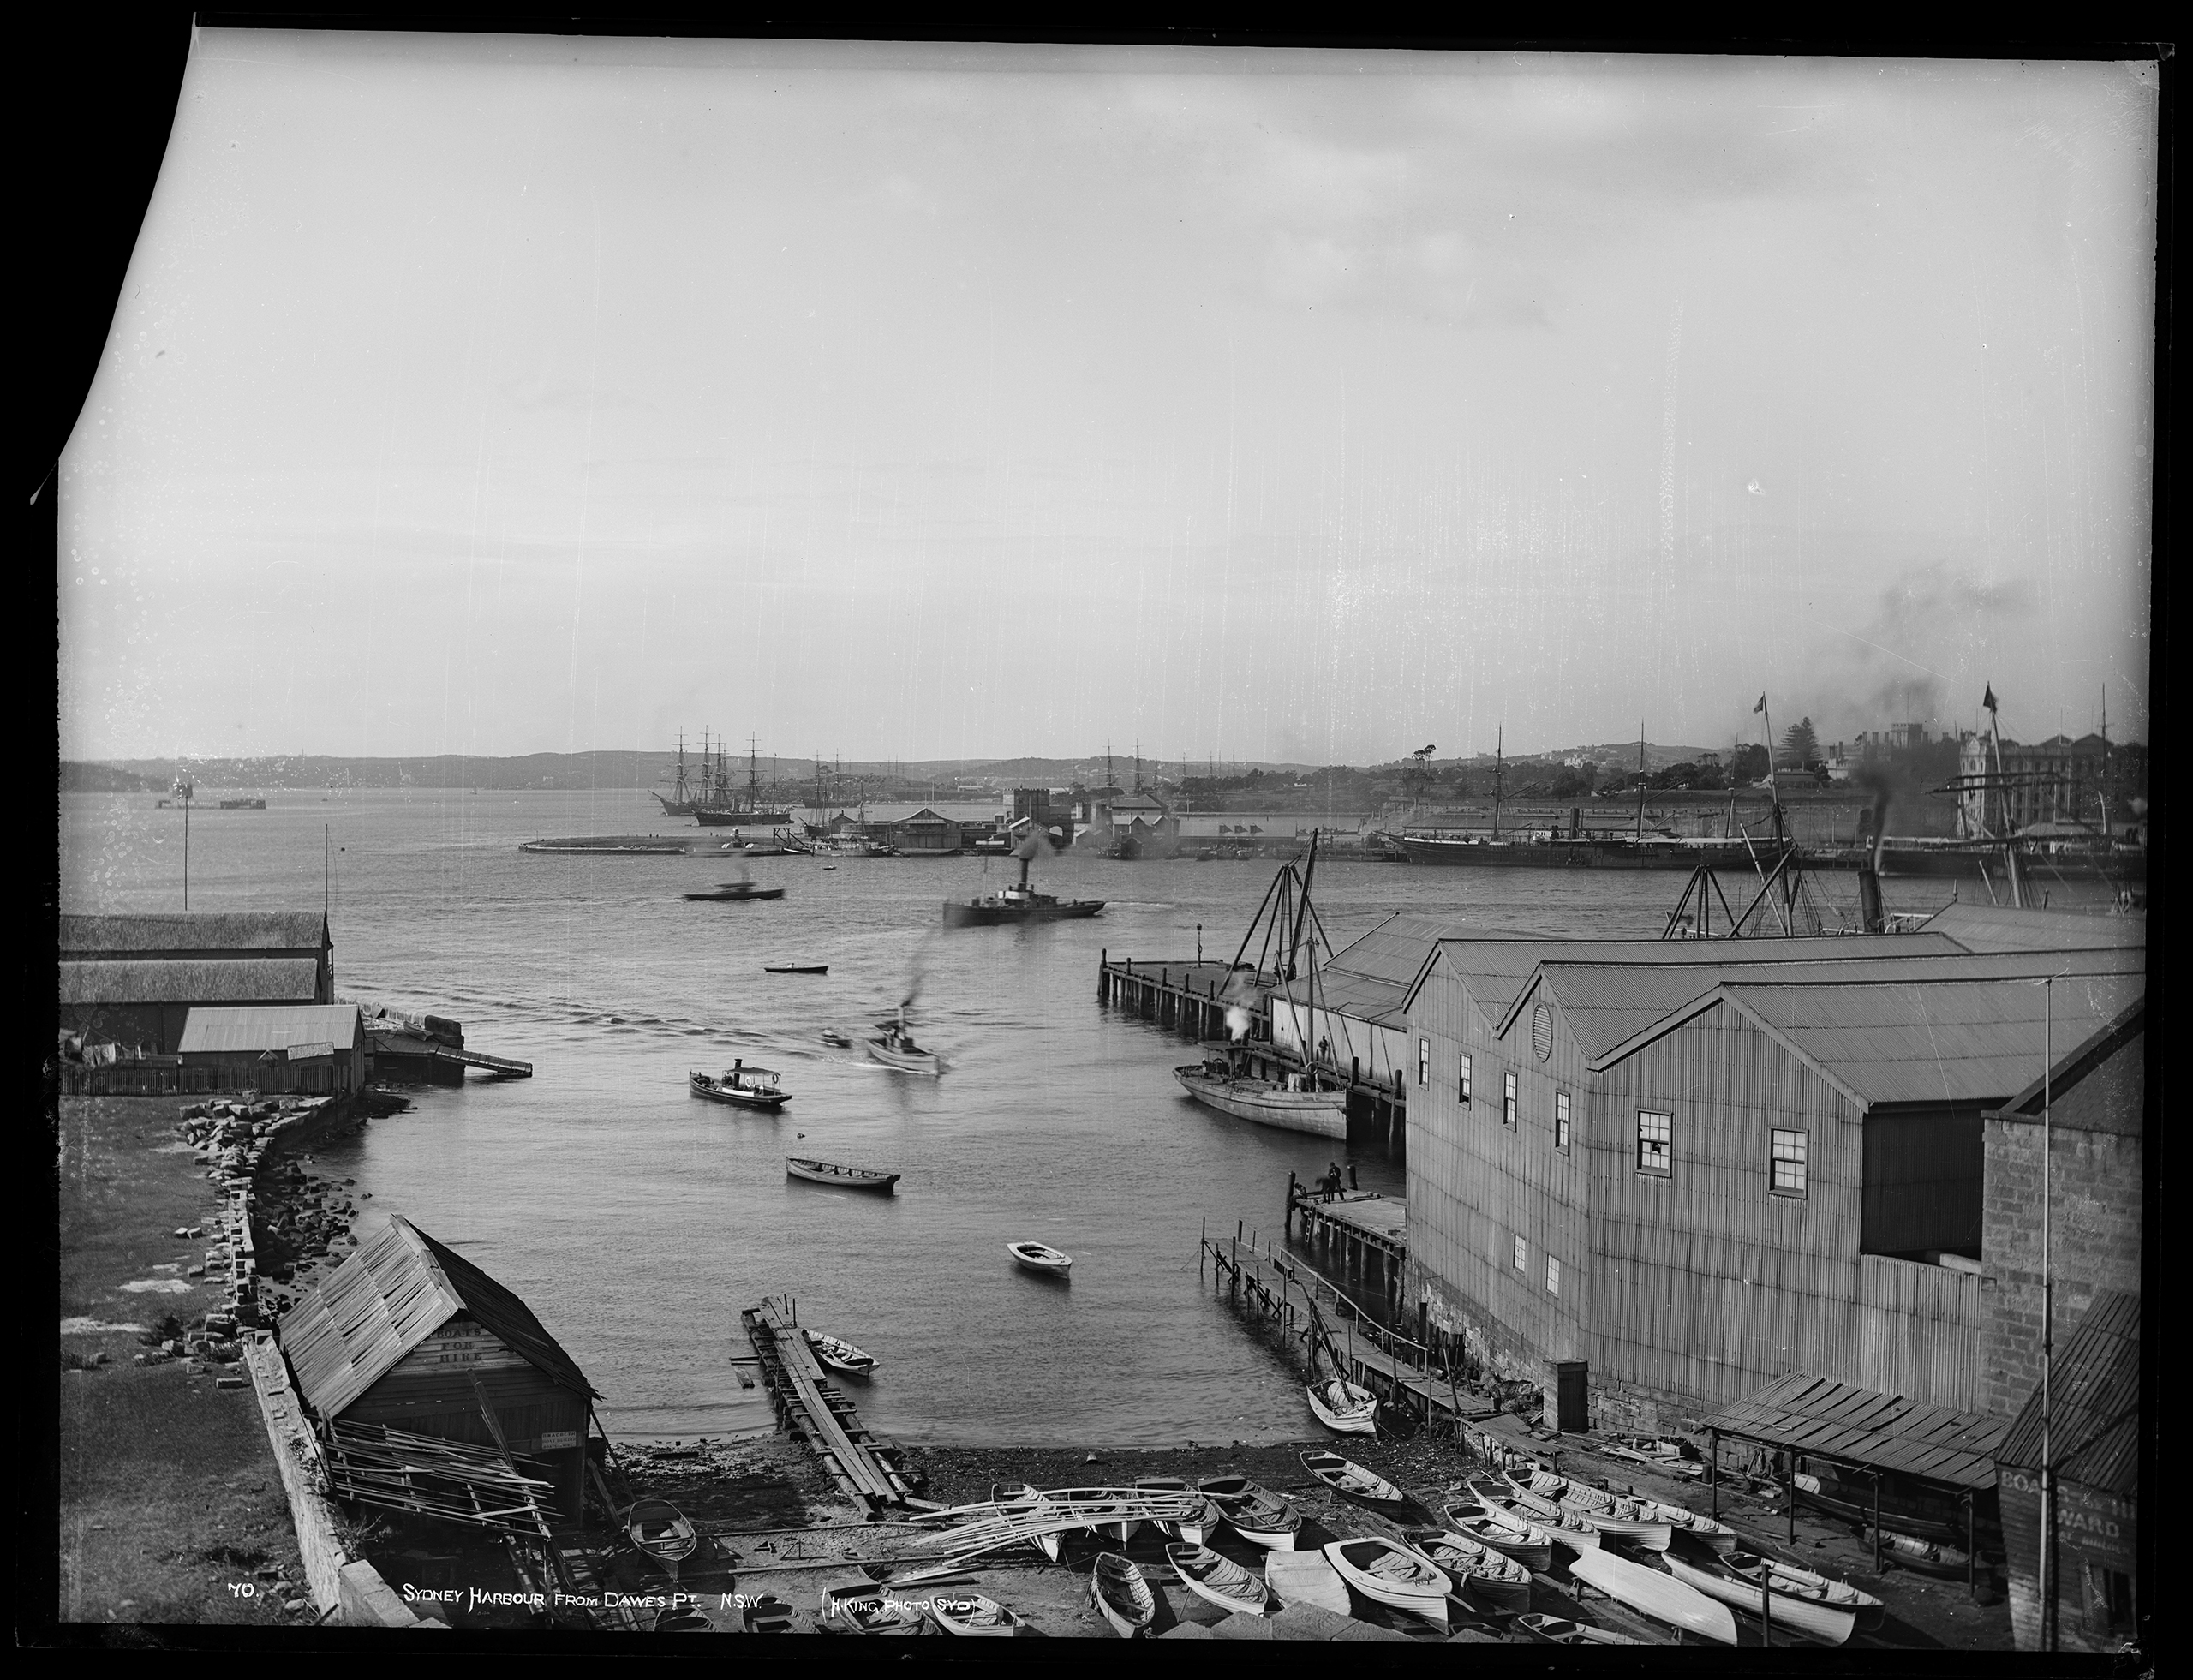 Glass plate negative of Campbells Cove, Fort Macquarie, Water Police base and Circular Quay, Sydney, 1883-1890